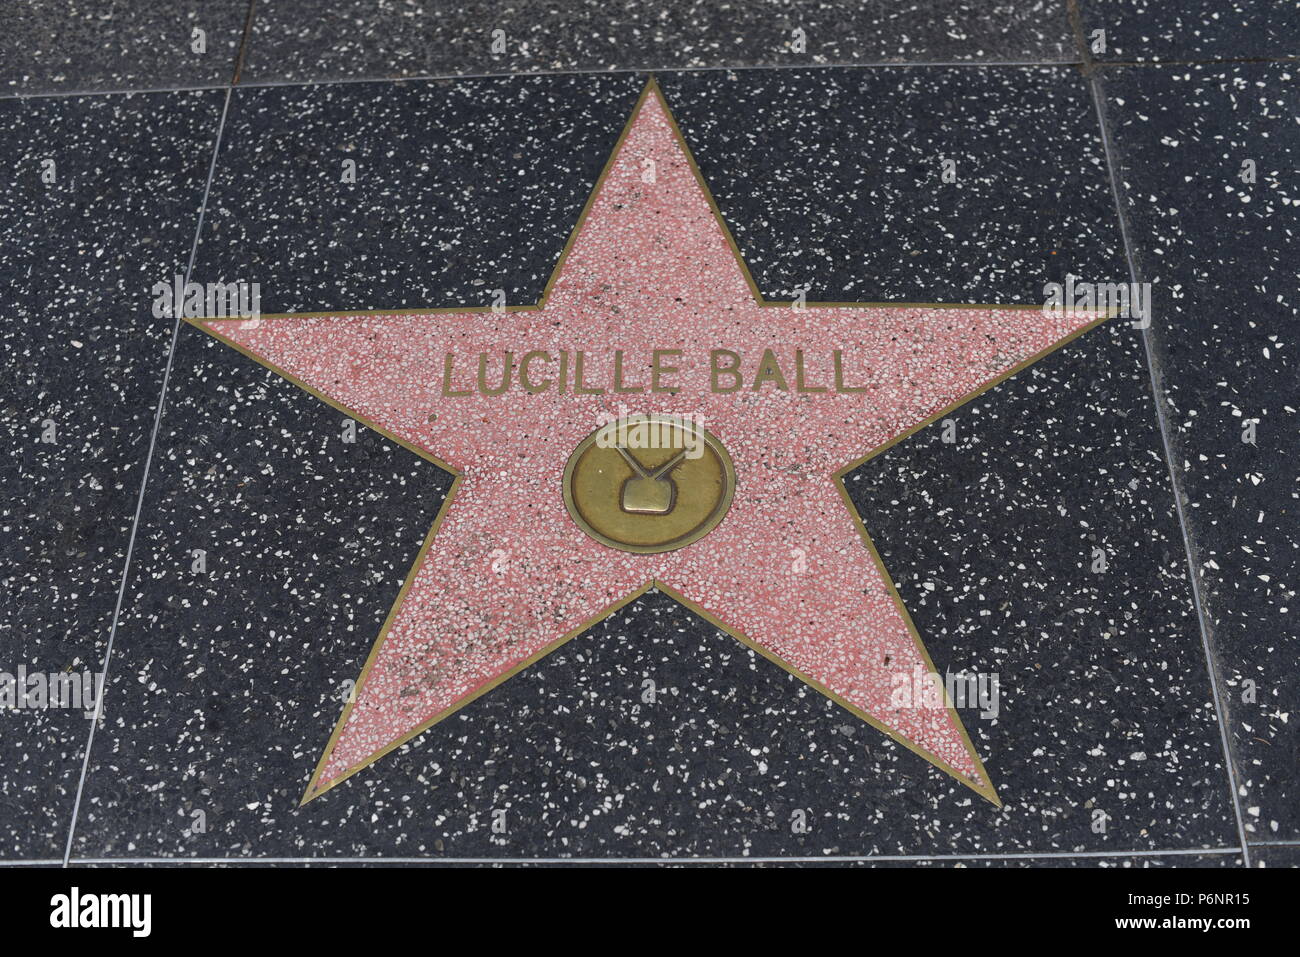 HOLLYWOOD, CA - June 29: Lucille Ball star on the Hollywood Walk of Fame in Hollywood, California on June 29, 2018. Stock Photo